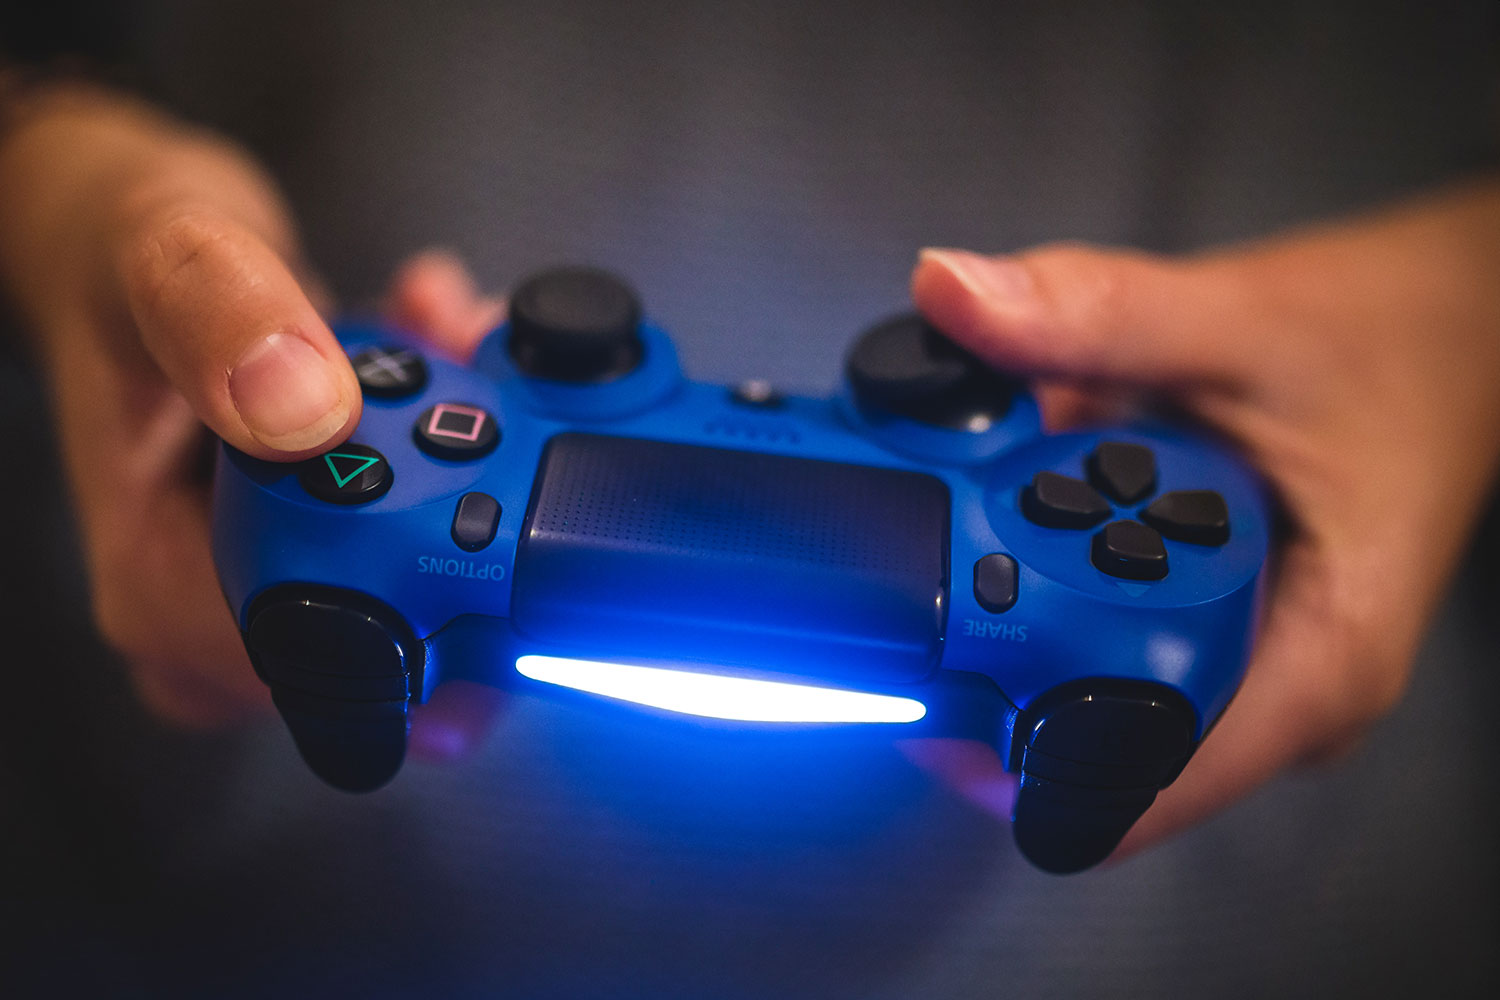 How to Put a Password on a PS4 to Prevent Unwanted Access